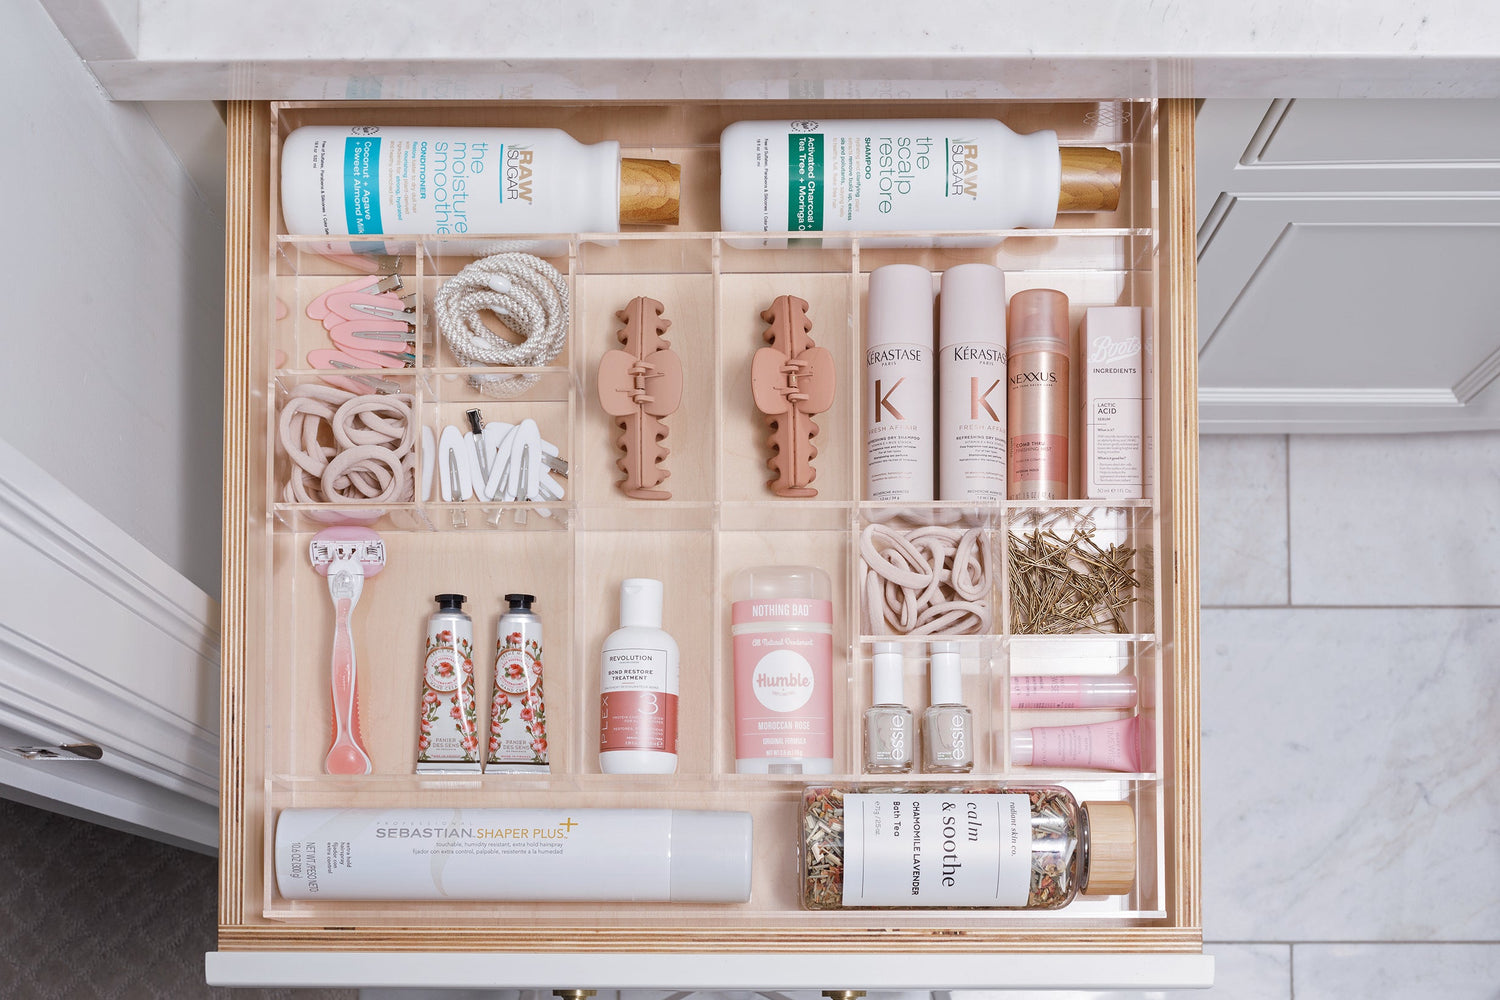 Immaculate bathroom drawer using a Sydney custom-fit organizer to contain products such as hair ties, nail polish, and lotion.